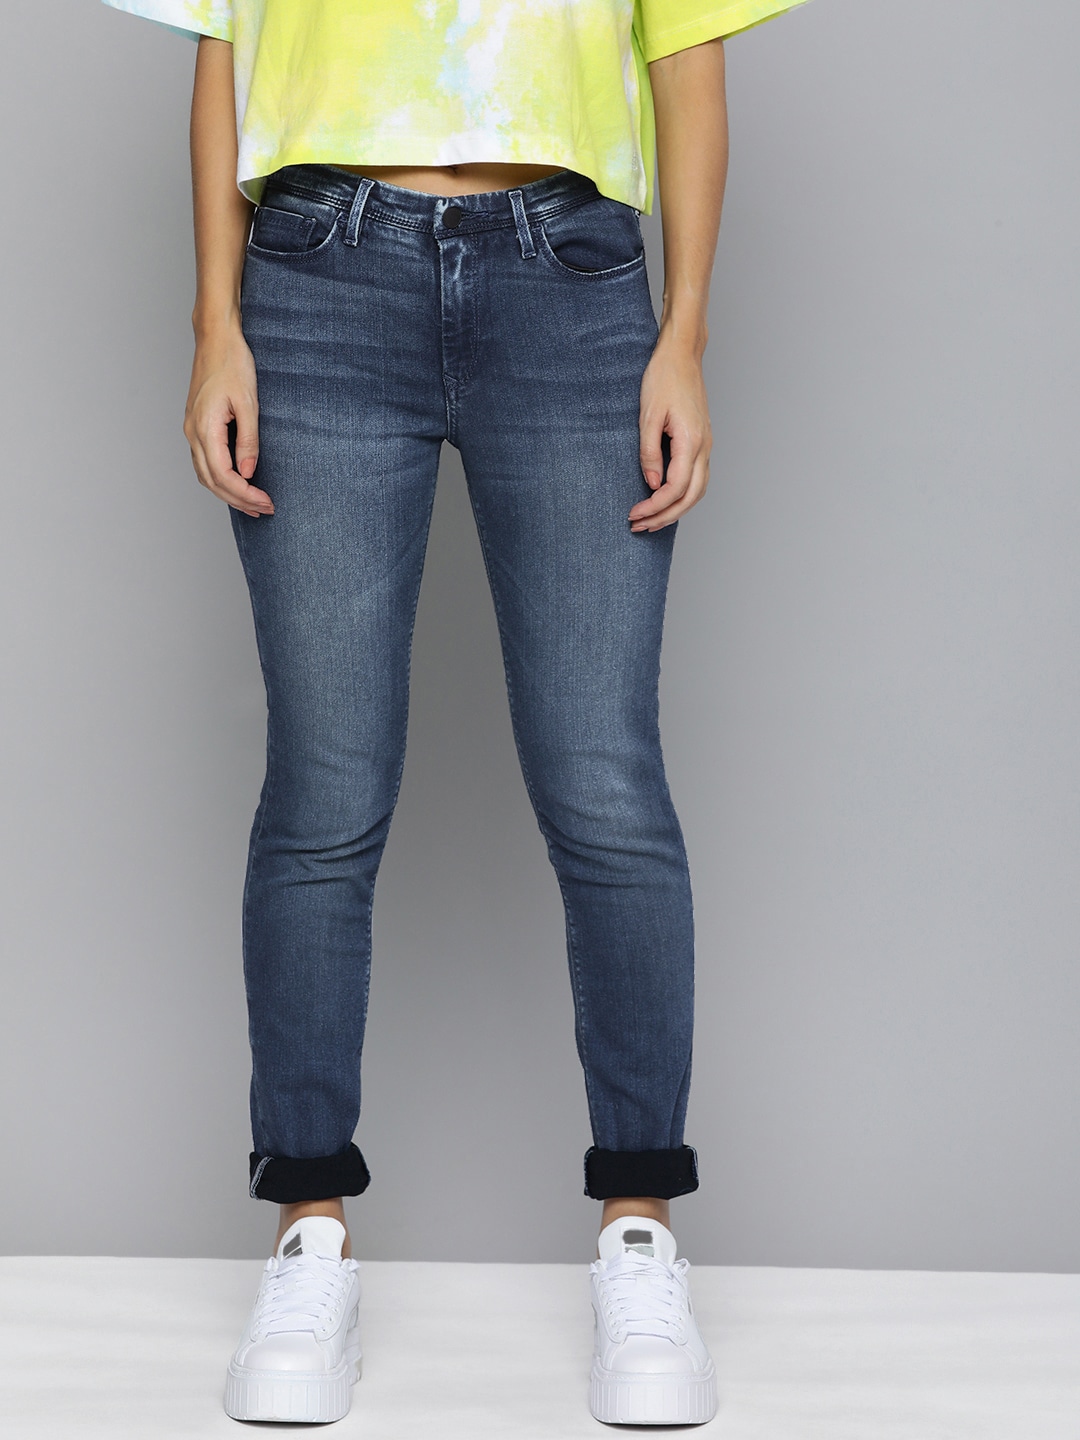 Levis X Deepika Padukone Women Blue 711 Skinny Fit Heavy Fade Stretchable Jeans Price in India